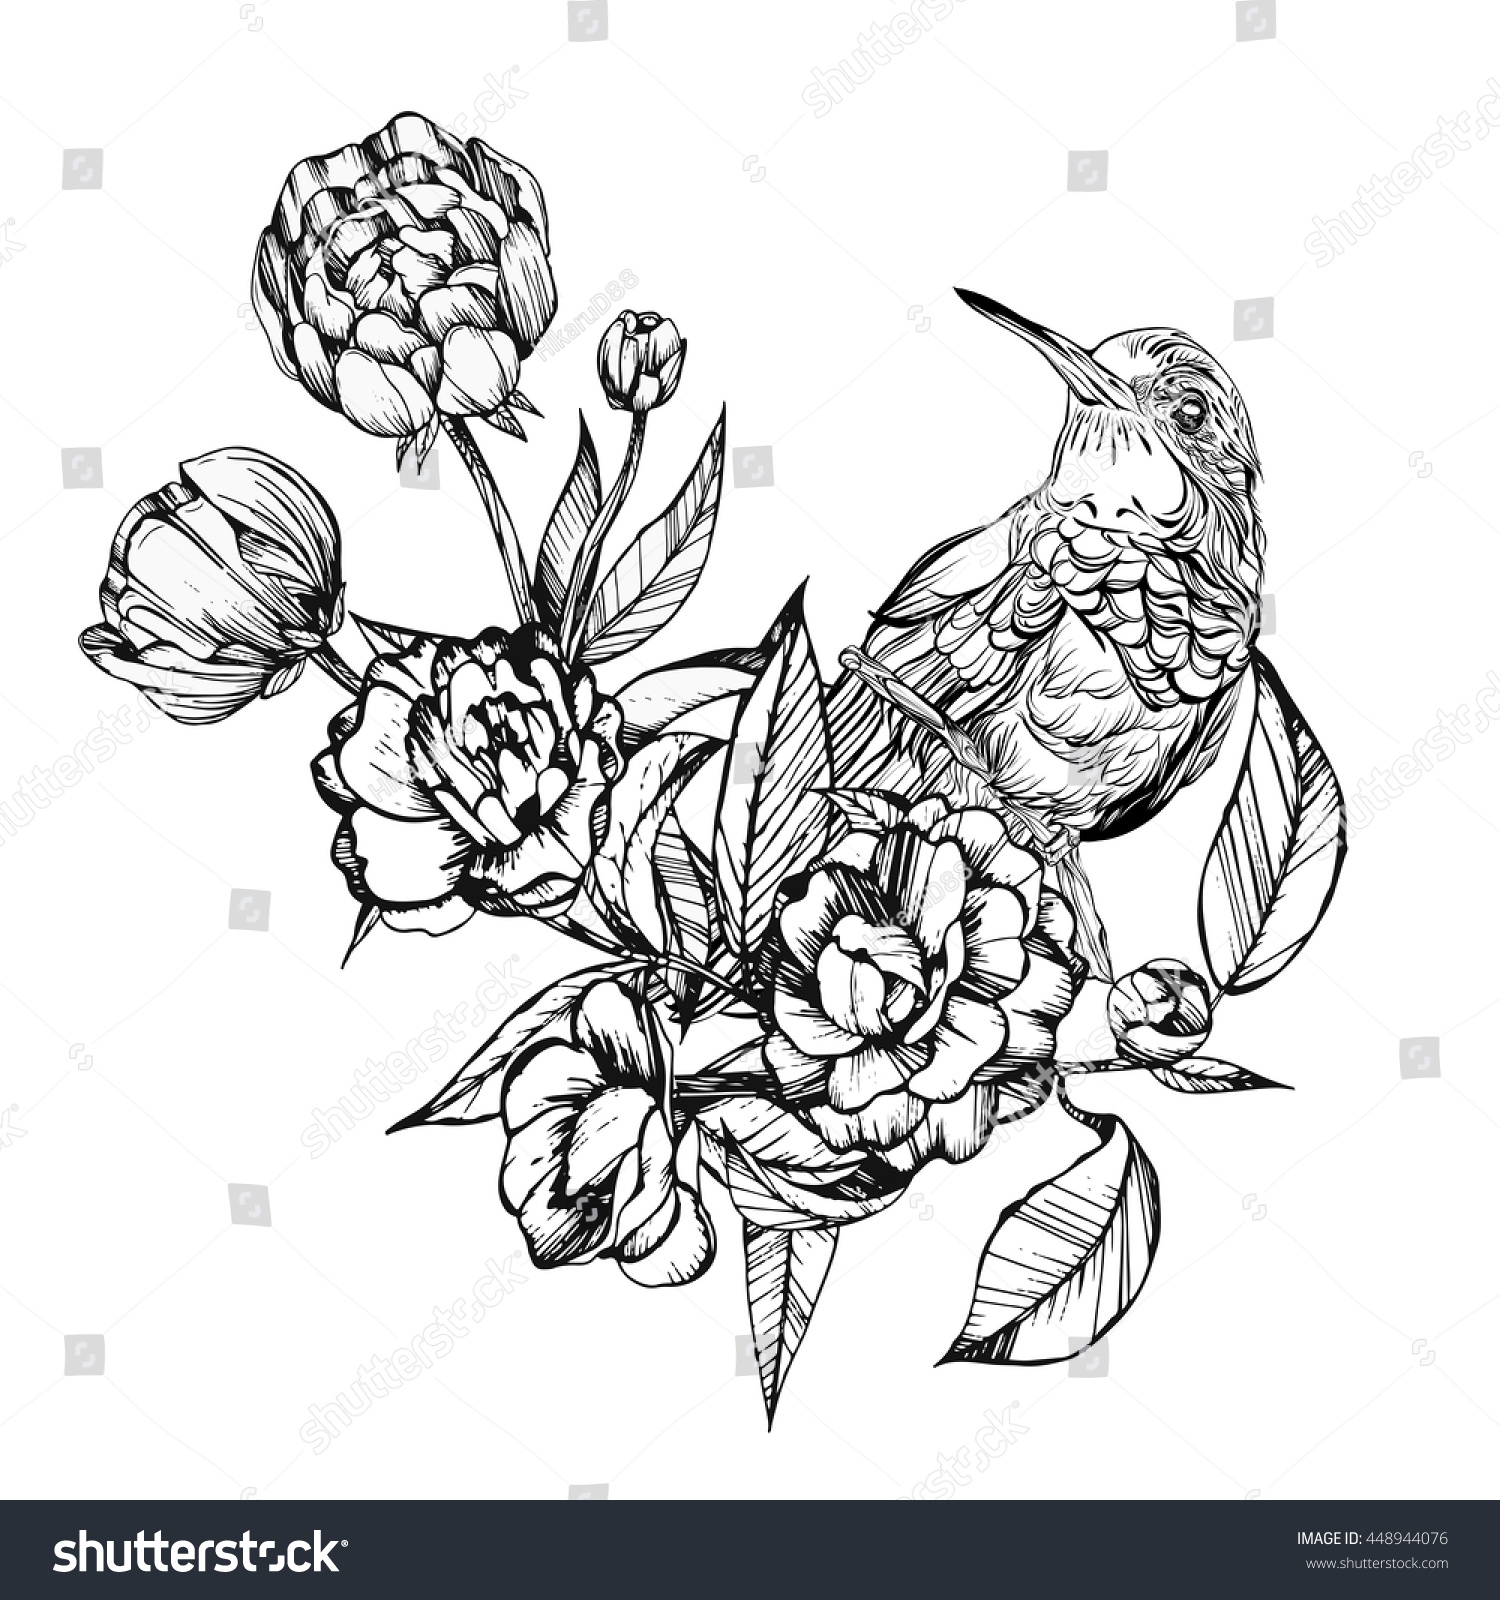 Colibri.Detailed Drawing Of A Bird.Vector Illustration Isolated On ...